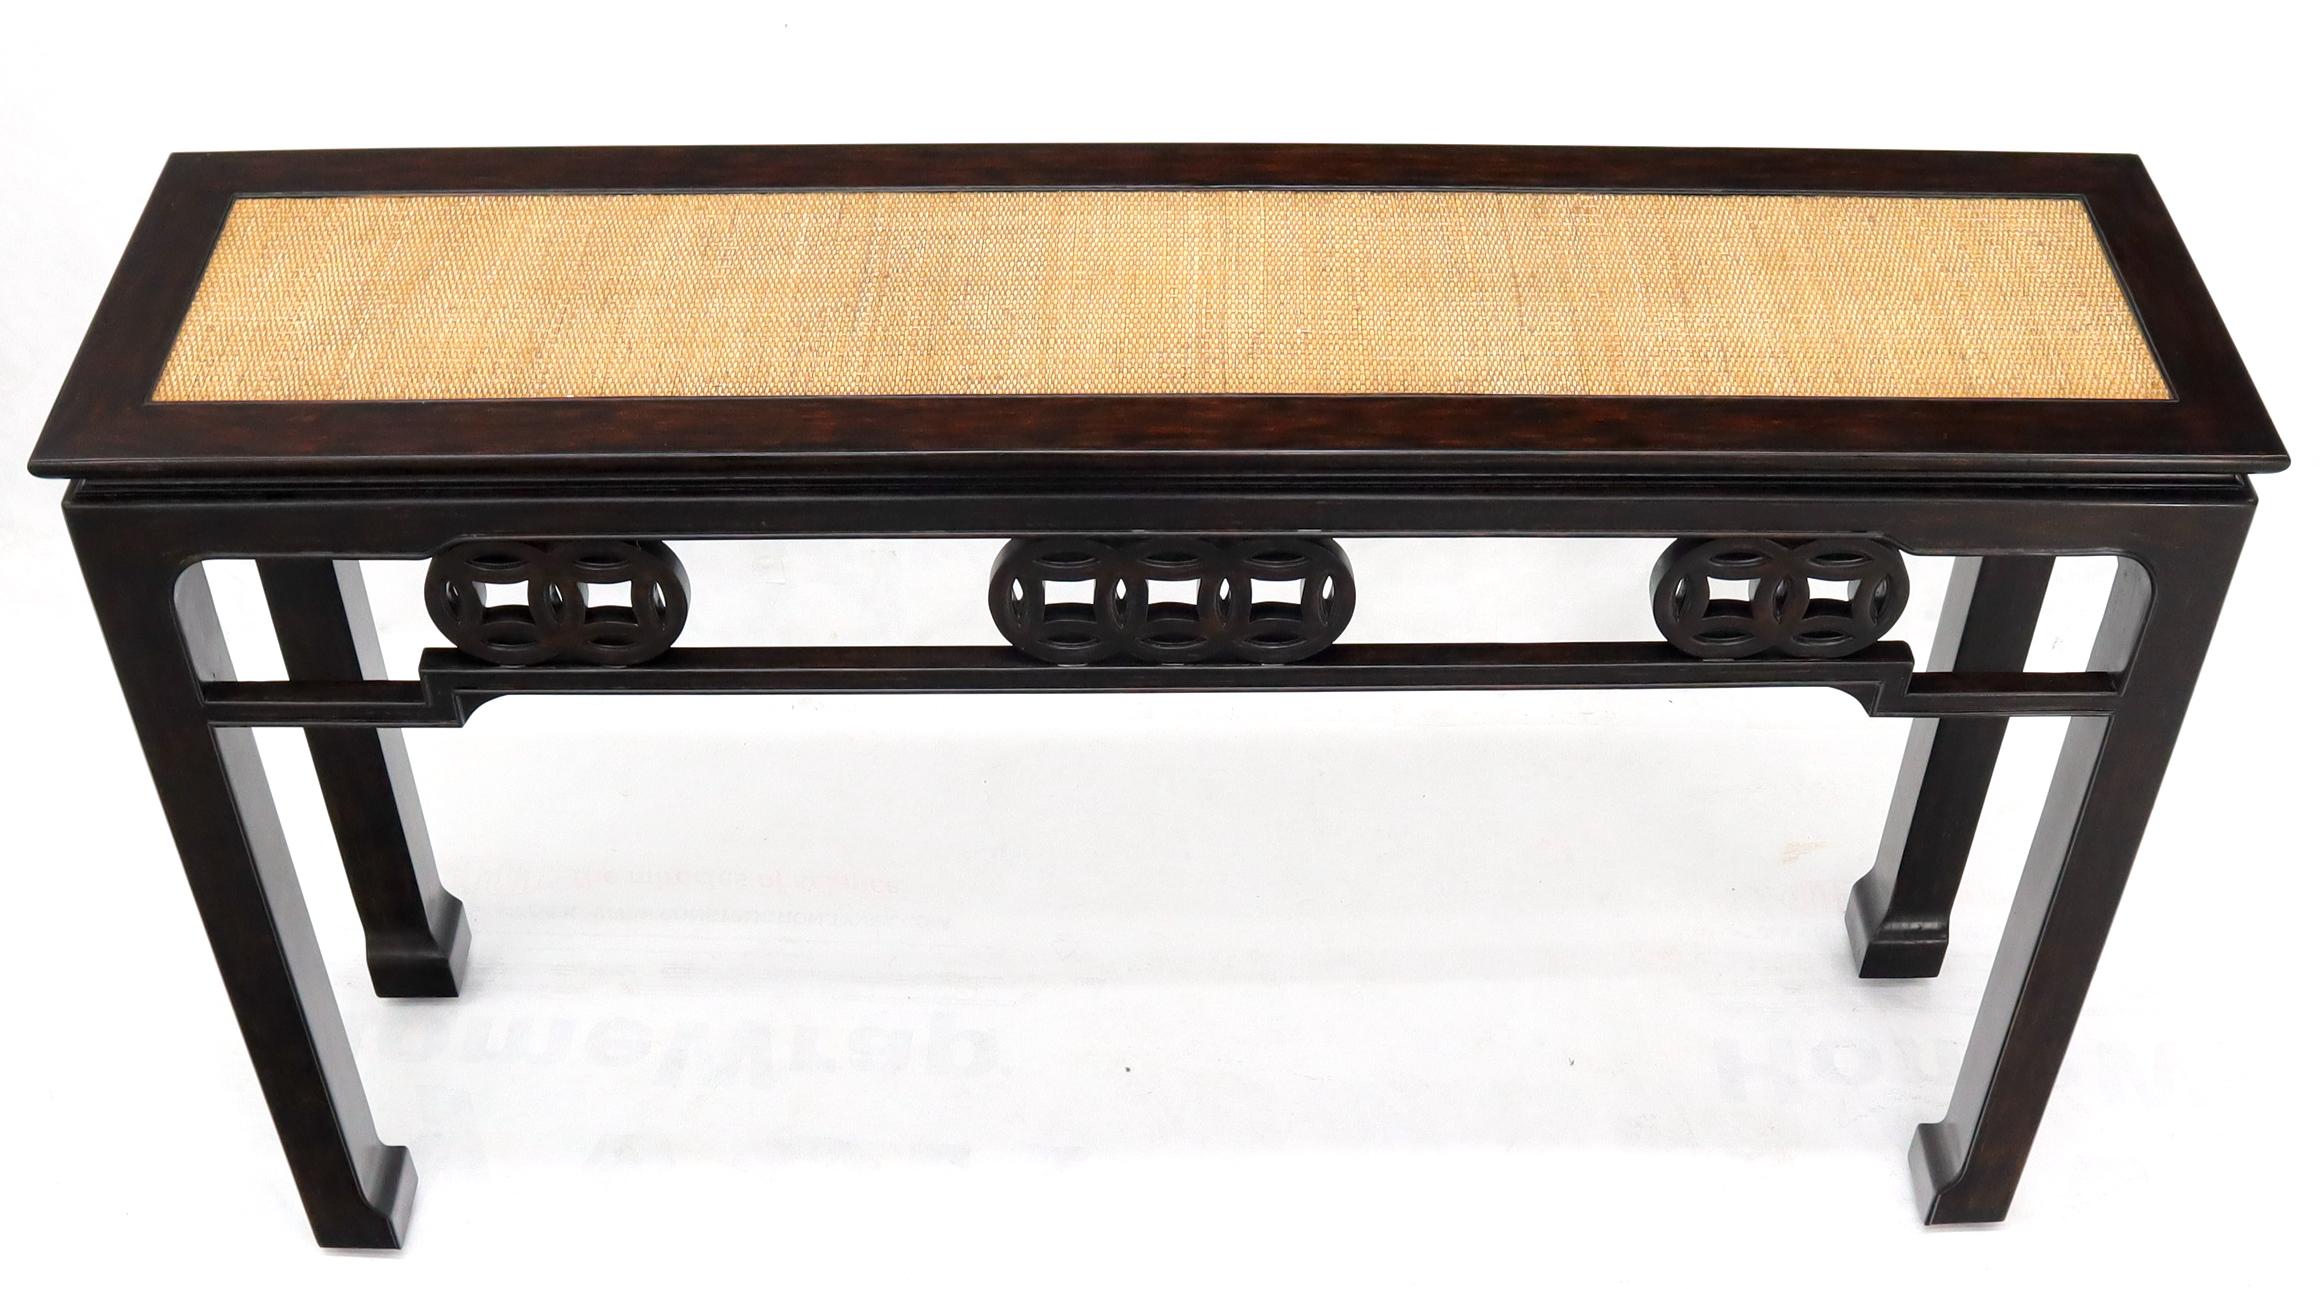 Oriental Asian midcentury style carved base high quality craftsmanship console table with caned top.